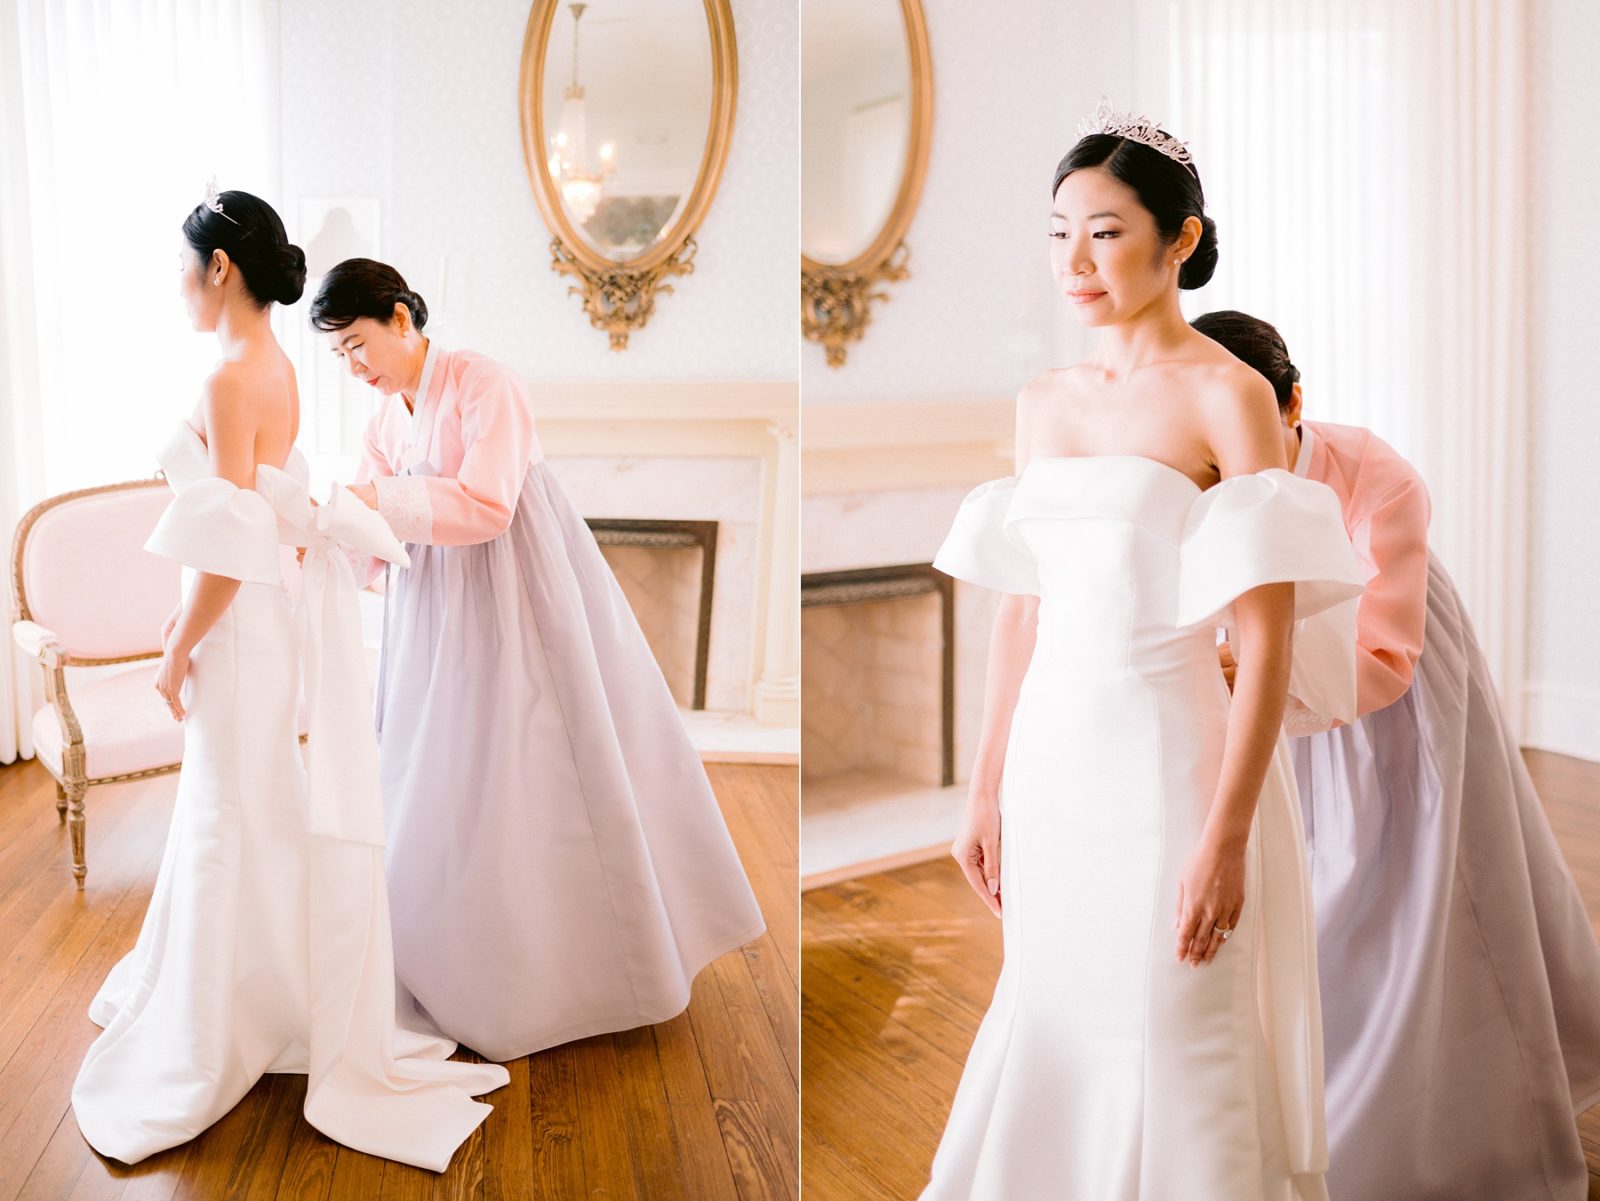 bride putting on dress, mother of bride traditional korean fashion, korean bride, bride with a tiara, classic bride, wedding dress with removable sleeves, woodbine mansion wedding, woodbine mansion wedding details, classic austin wedding, mansion wedding venues near austin, historical wedding venue, best austin wedding venues, austin wedding photographer, hill country wedding, round rock wedding venue